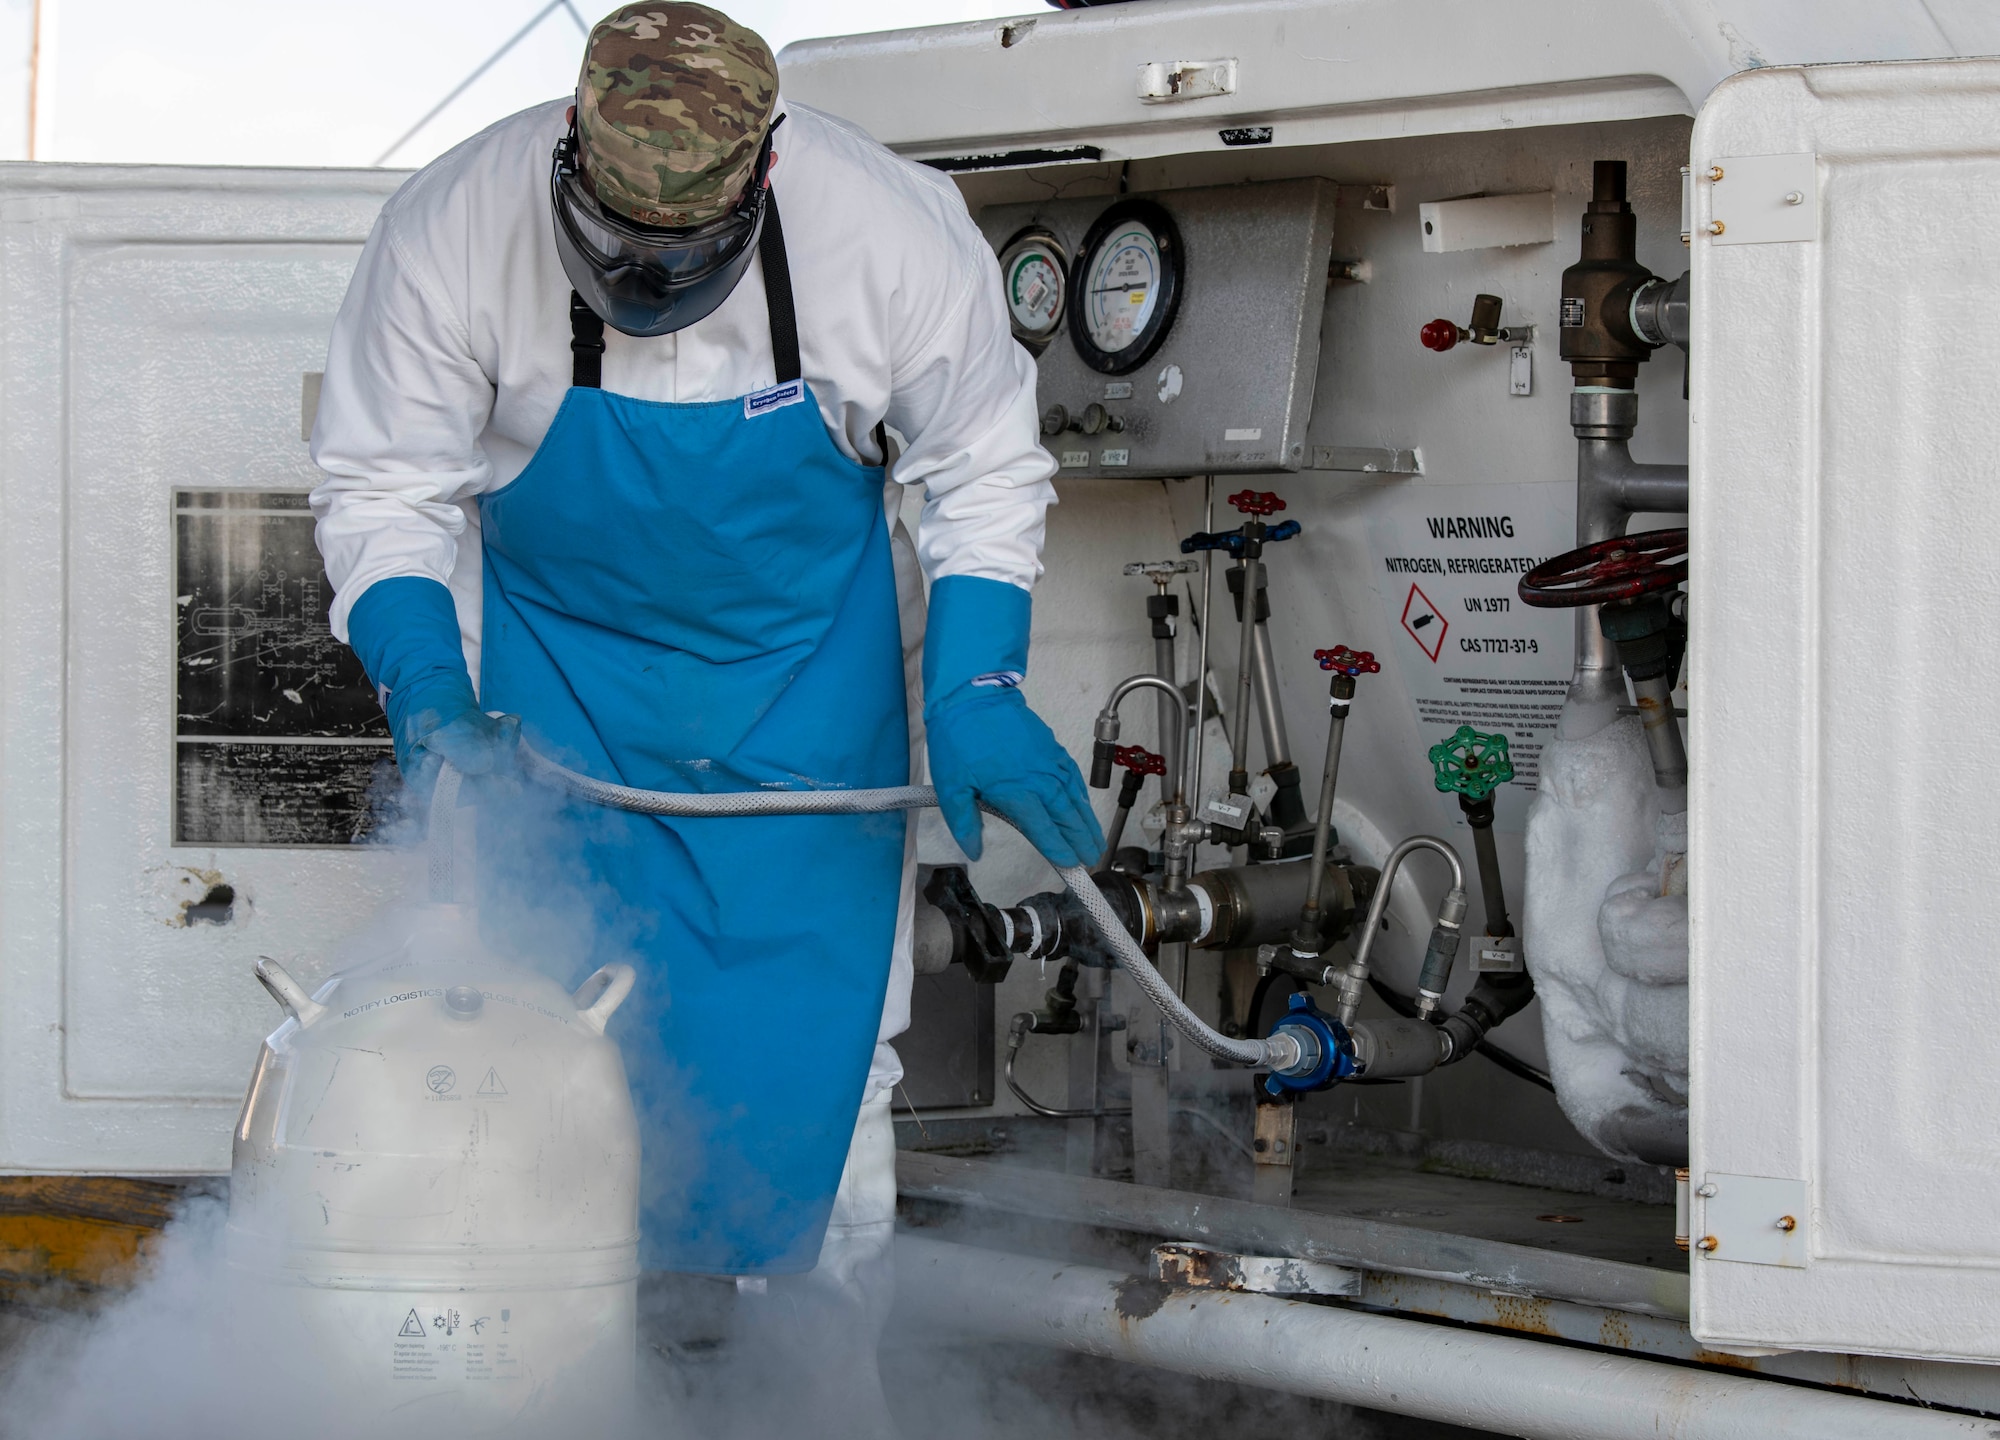 Staff Sgt. Thomas Hicks, 436th Logistics Readiness Squadron fuels cryogenics noncommissioned officer in charge, fills a tank with liquid nitrogen at Dover Air Force Base, Delaware, Jan. 13, 2021. Cryogenics Airmen wear special equipment to protect themselves from liquid nitrogen’s dangerously low temperatures of minus 320 degrees Fahrenheit. (U.S. Air Force photo by Airman 1st Class Stephani Barge)